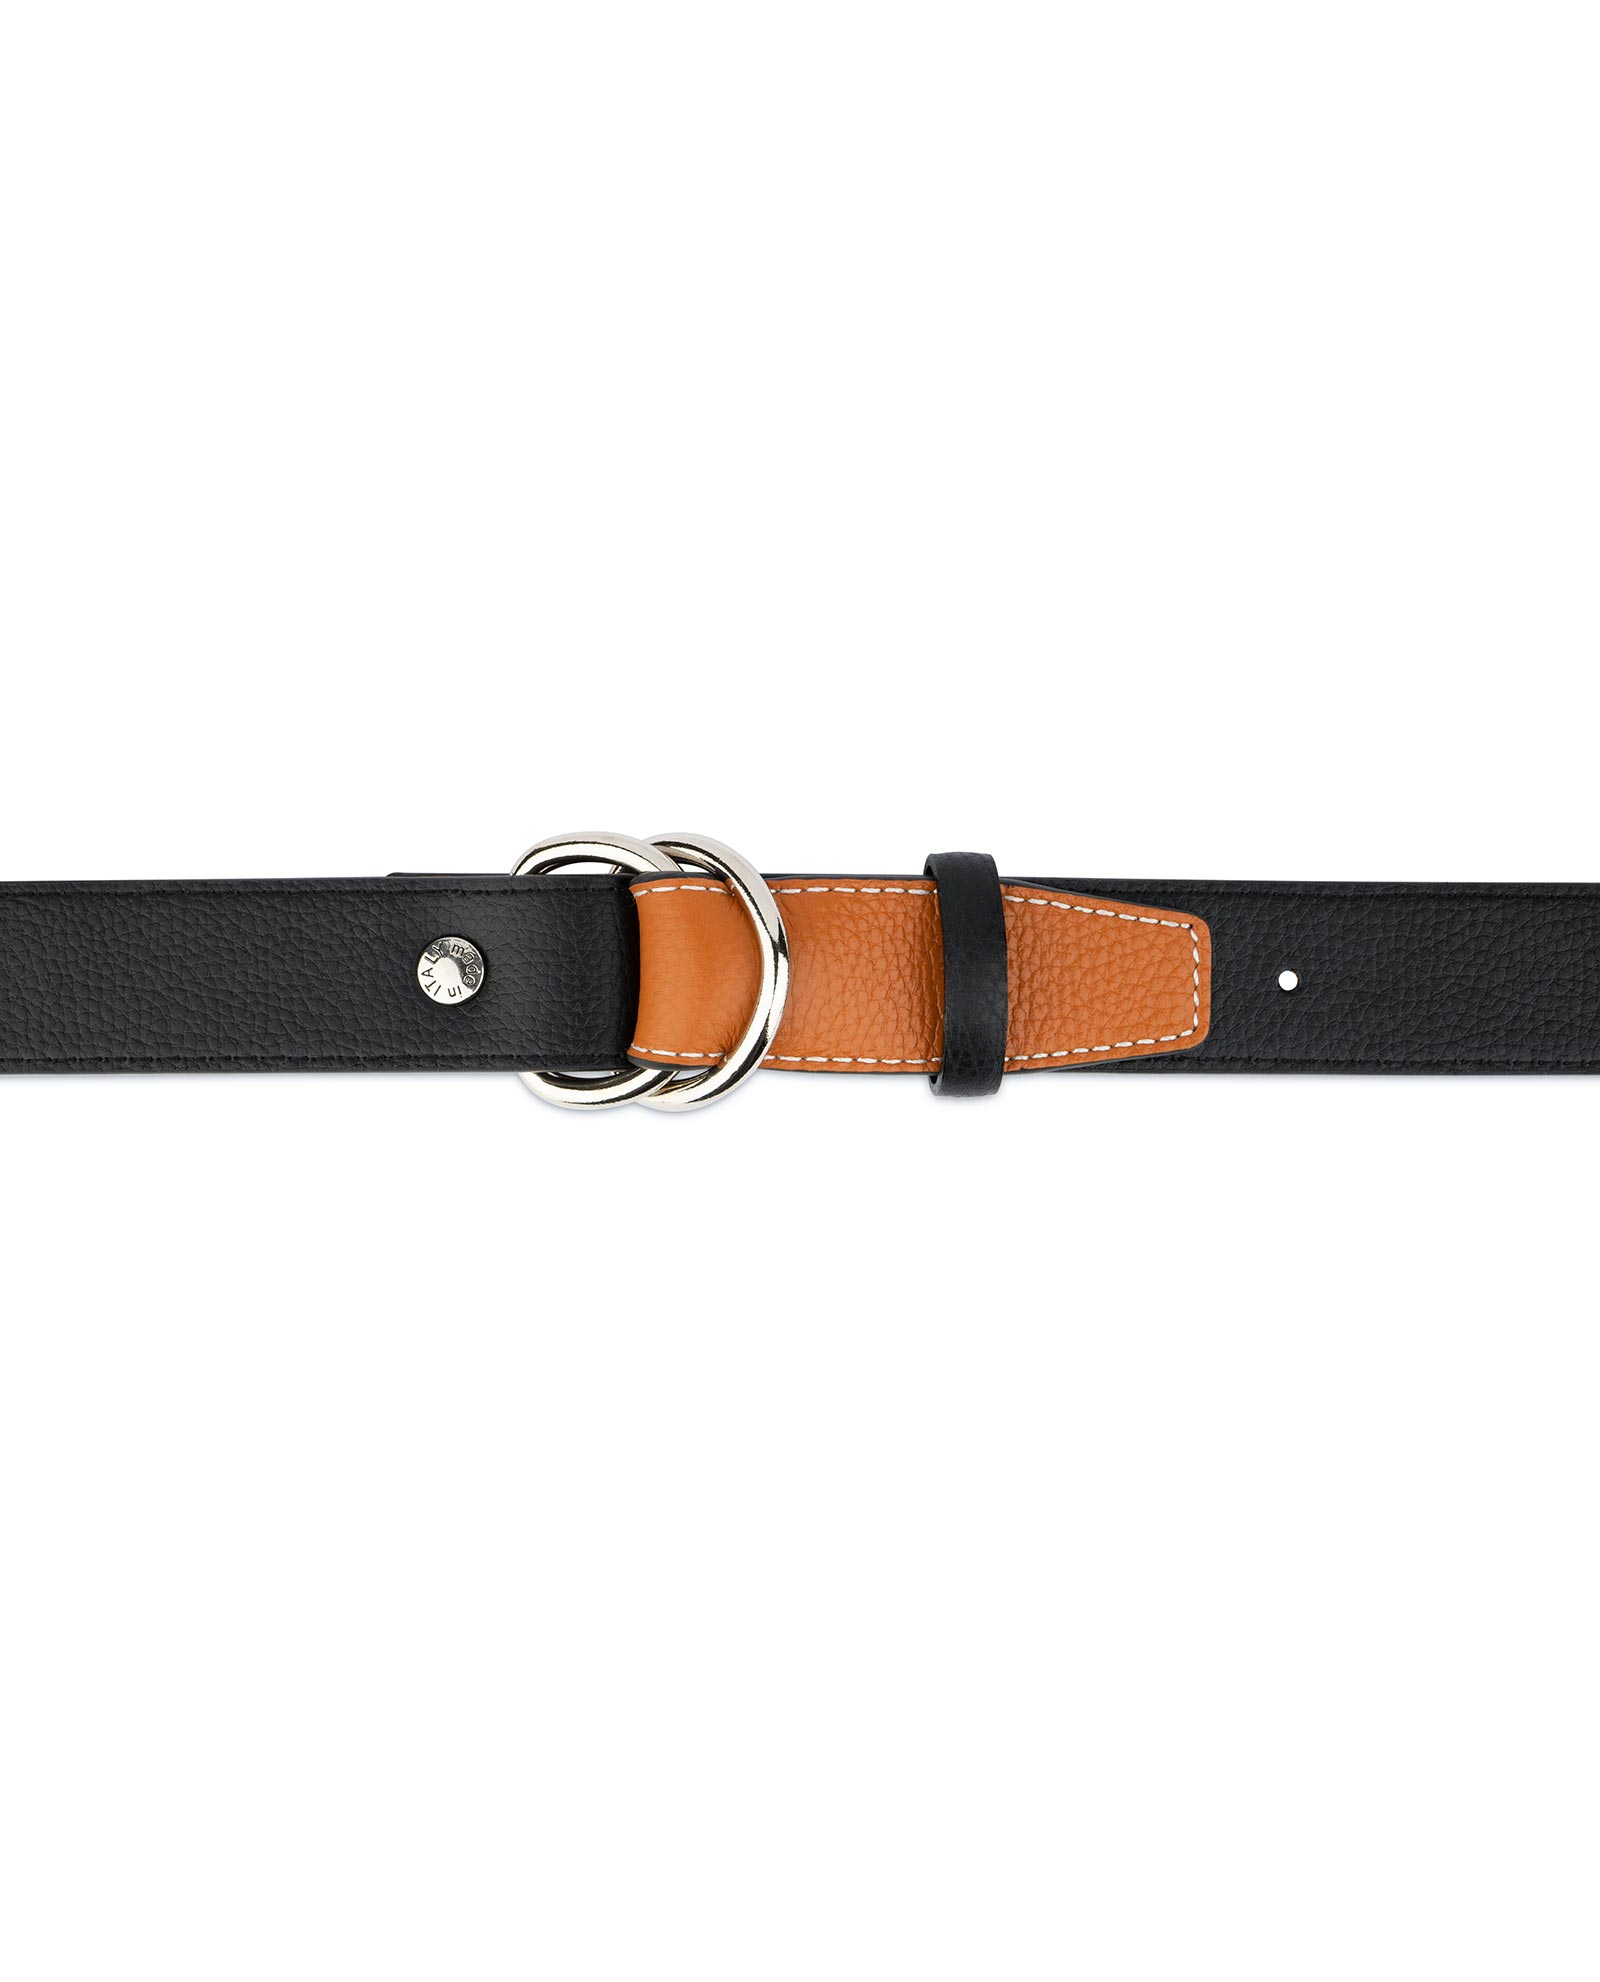 Leather Belt Loop Snap Ring with Double Snaps Black Wave Pattern GVC 